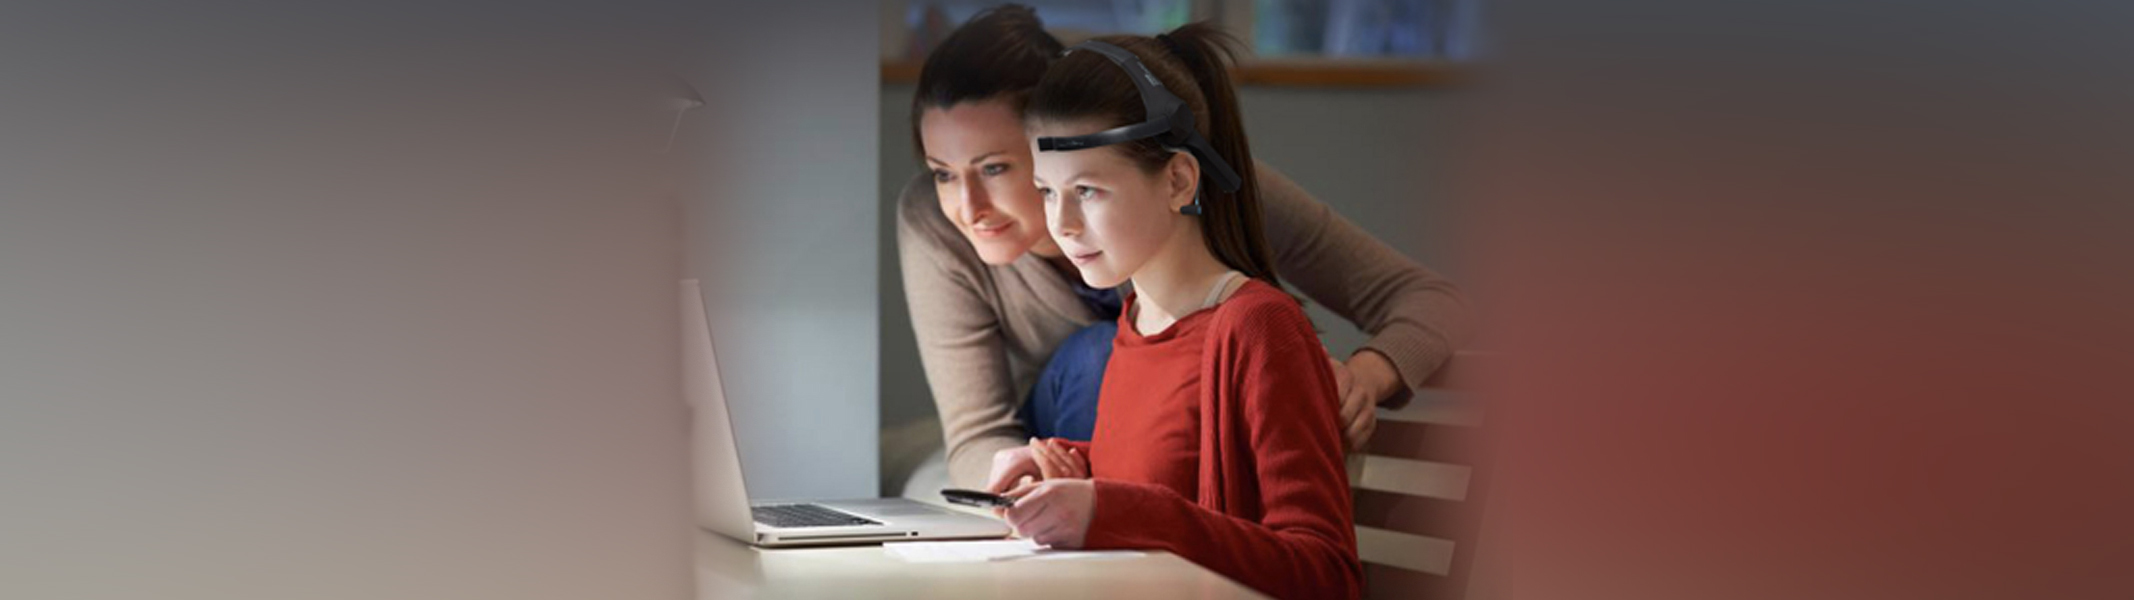 Child studying with parent wearing eeg headset